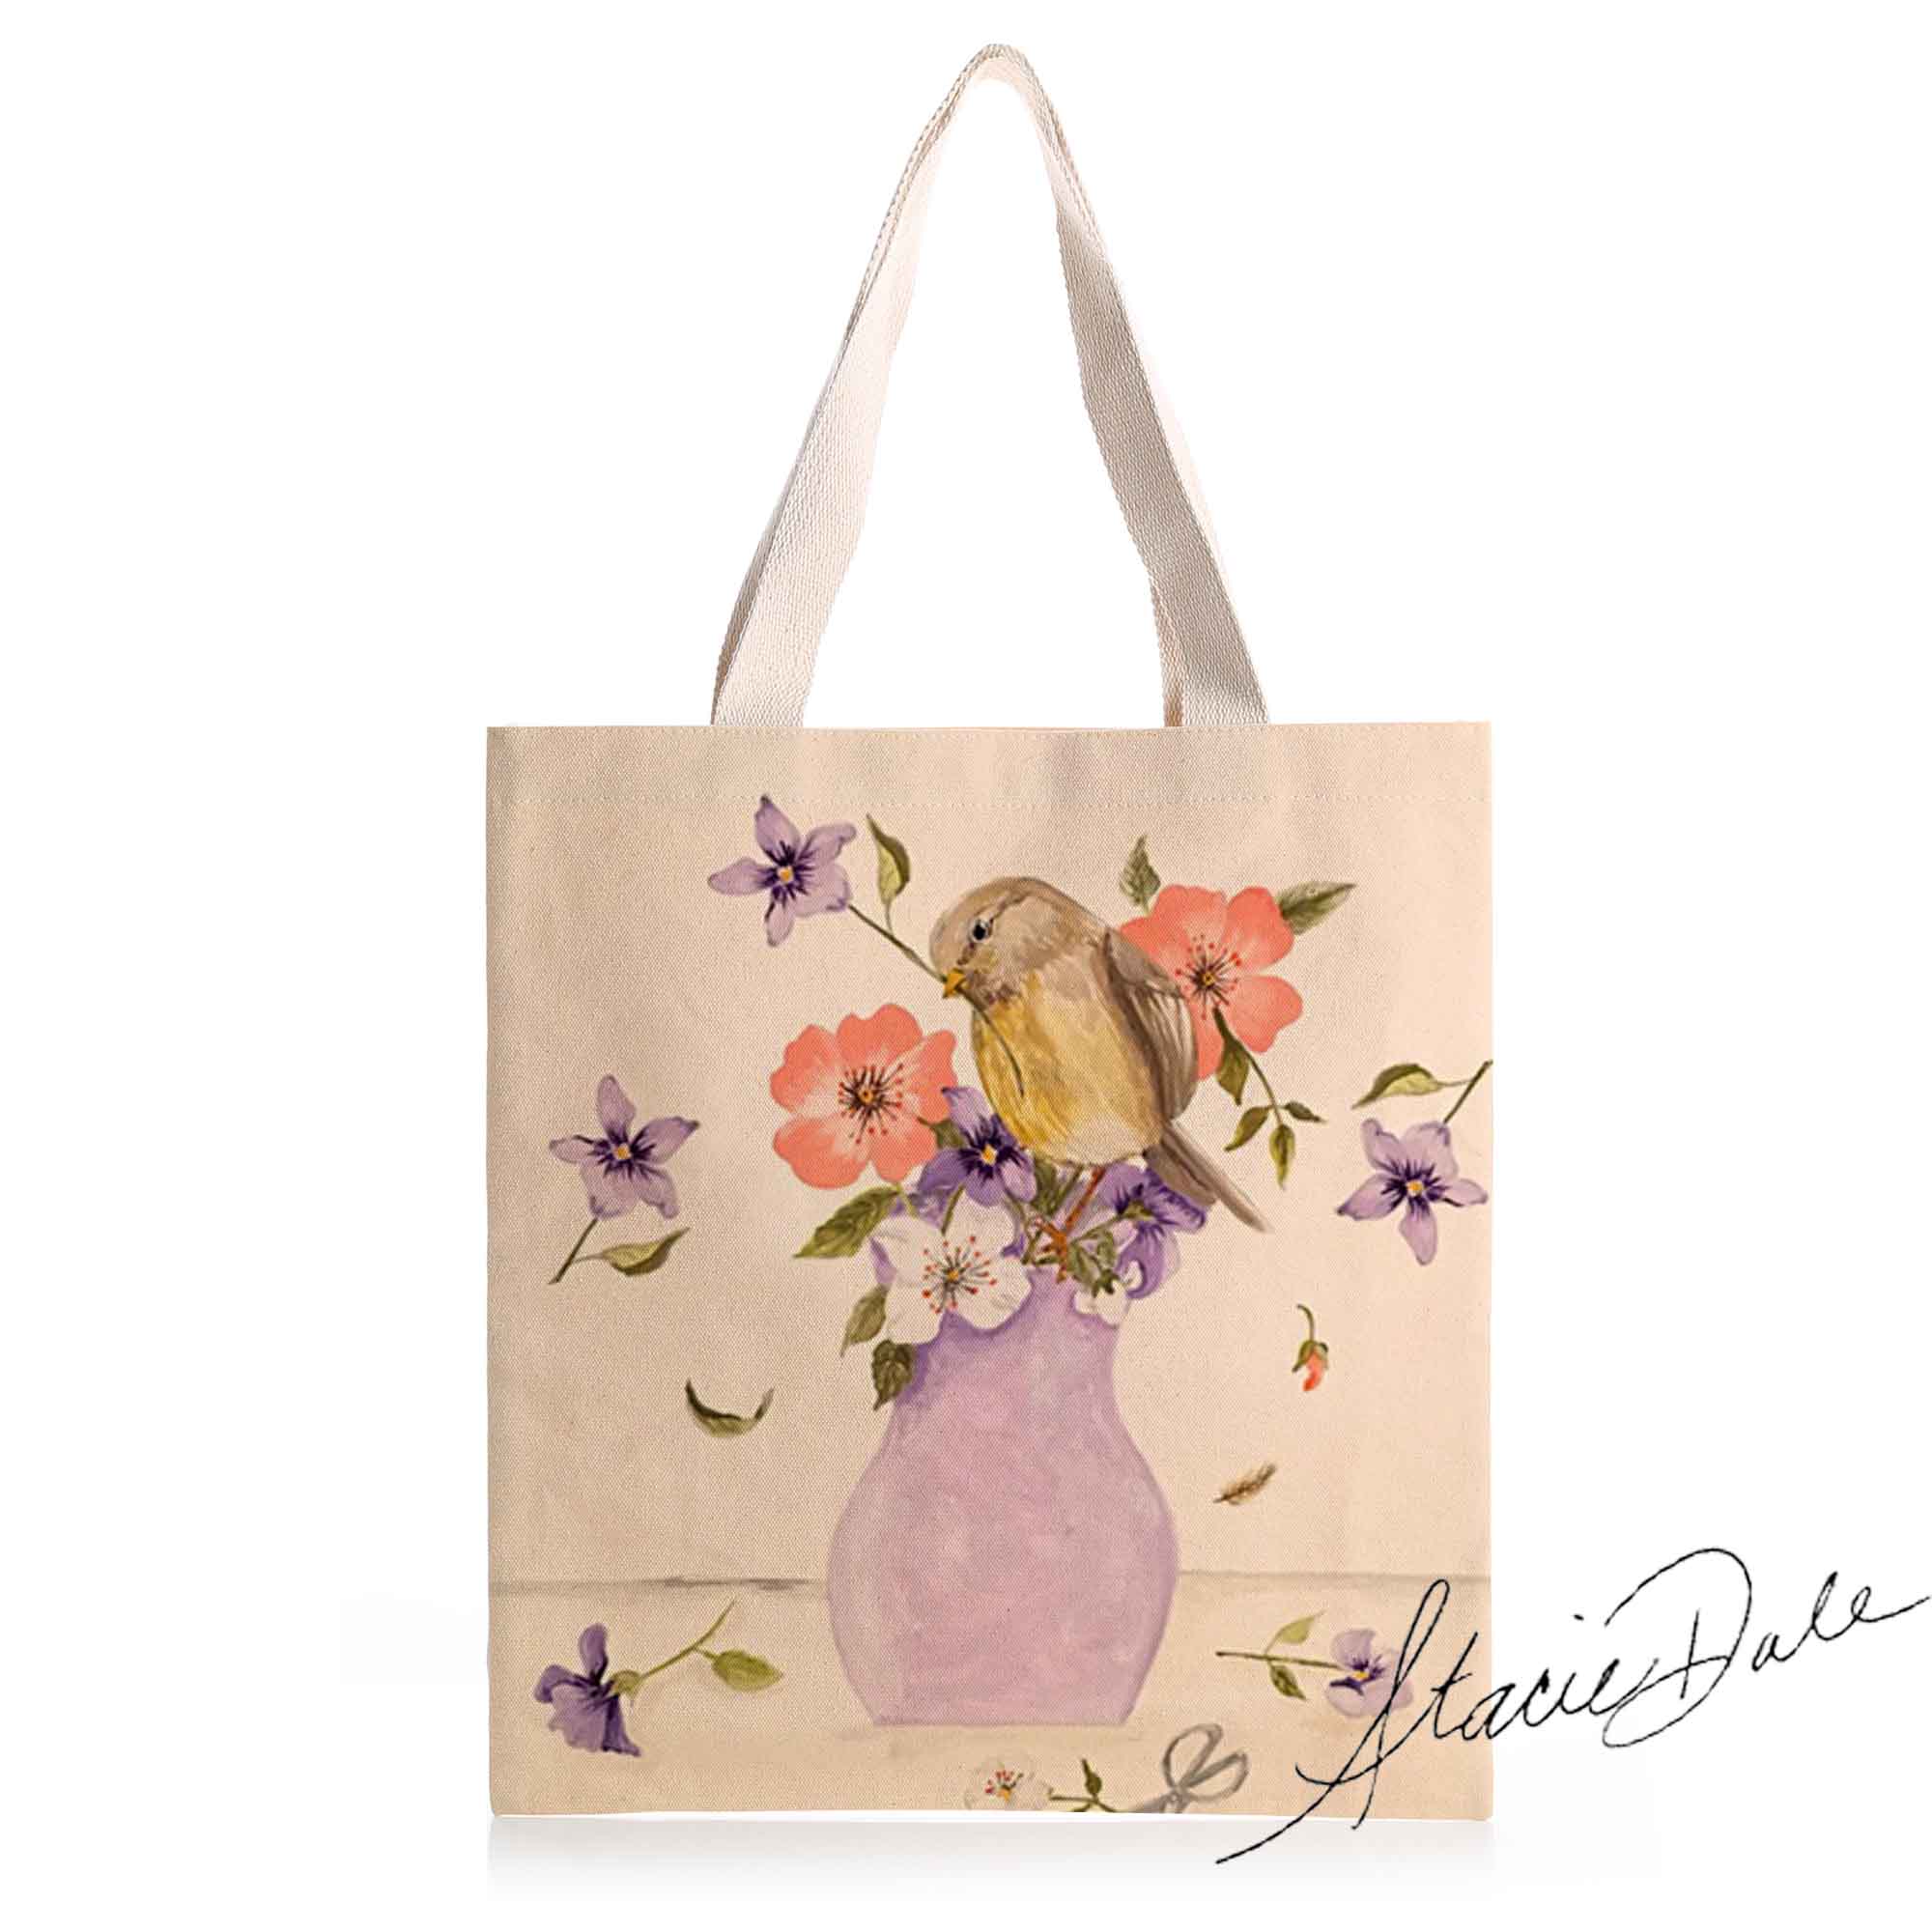 Feblilac Purple Vase Flower and Bird Canvas Tote Bag by Stacie from US